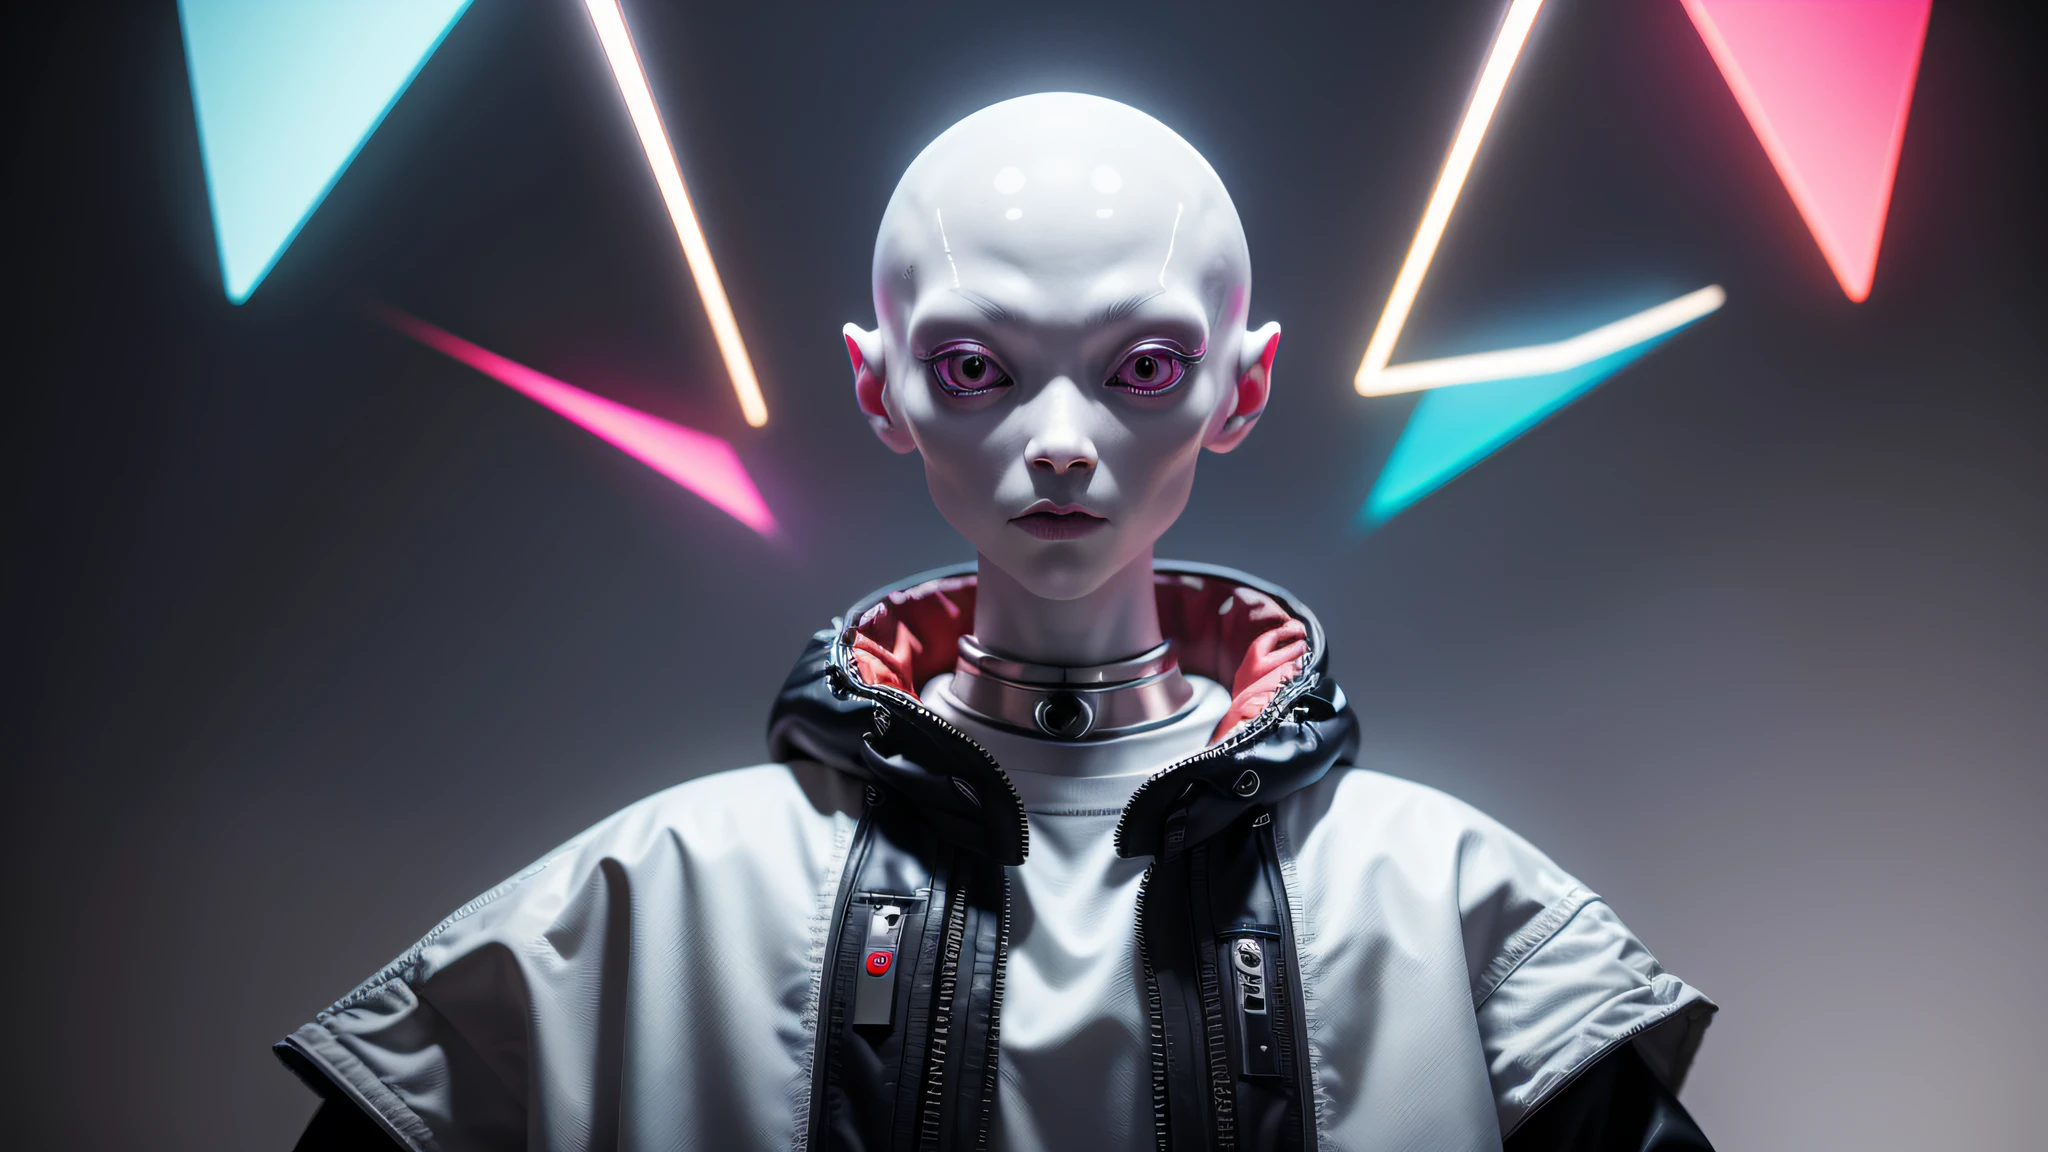 An alien, with albino and realistic skin, large head, short and thin neck, very large eyes and all black, which reflects the local lighting, a nose similar to that of humans but small, a mouth similar to that of humans but small, the body is thin and thin, the alien wears a white sleeve shirt with a letter made of small silver that appears to the right represented within a triangle of the same size, the clothing is inspired by the clothes used for surfing, the color to be used is red, pink chock and blue, as well as details of the environment, and manufactured with neoprene fabric, it is possible to notice a silver necklace hanging from his neck, with a pinjente in the triangular shape with an eye that sees everything in the center as a symbol. the alien is in a recording studio whose scenery is minimalist and features a gray background in gradient hue to circular white, the camera captures the image from the waist up, the alien presents friendly and light expressions, the alien interact with the camera always with a slight smile of satisfaction and tranquility,  The skin used and all the elements are of extreme realism, especially the skins, the lighting is an illumination inspired by the 80s.